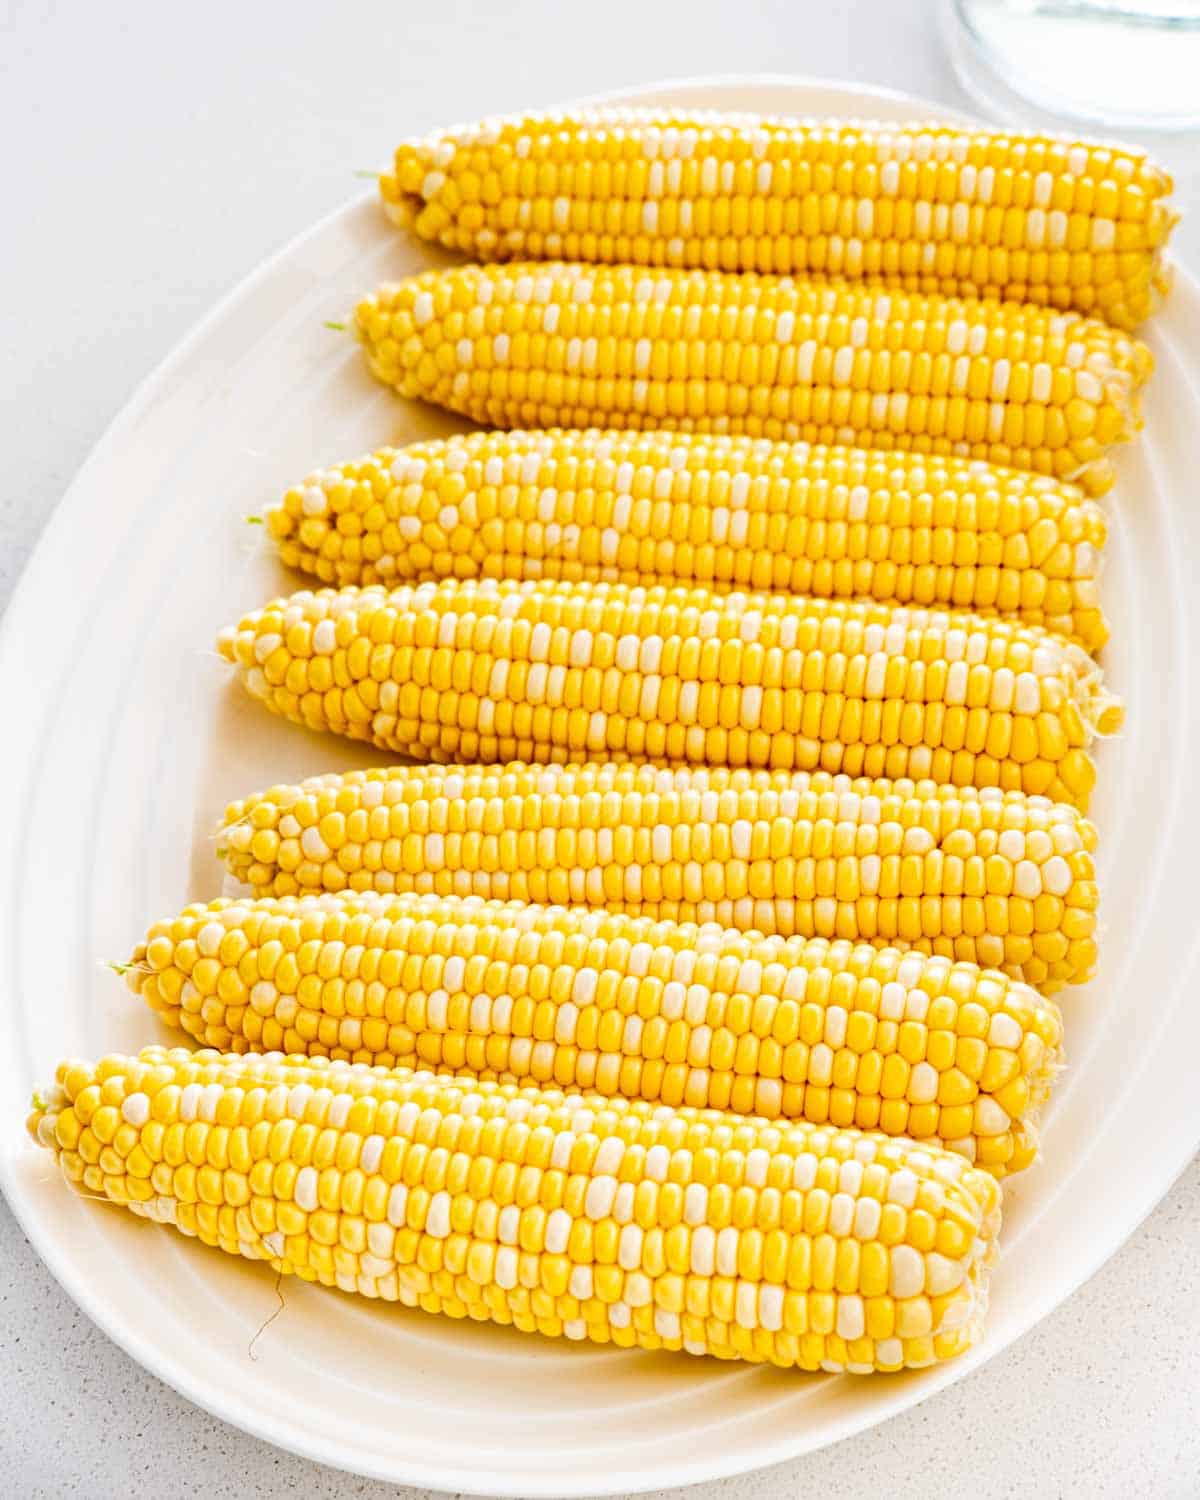 7 ears of corn on a white serve plate.